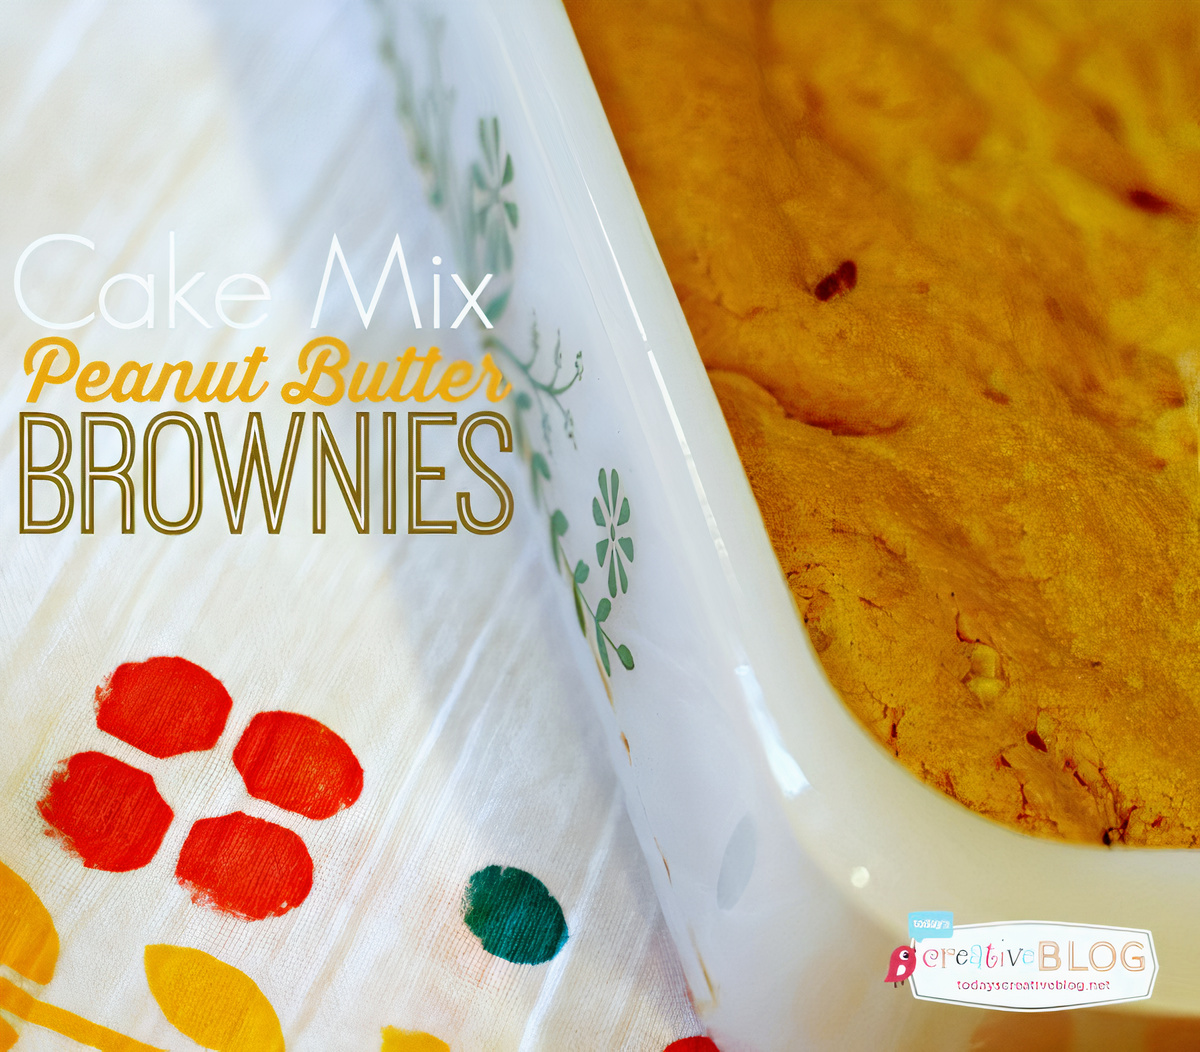 titled photo (and shown): Cake Mix Peanut Butter Brownies